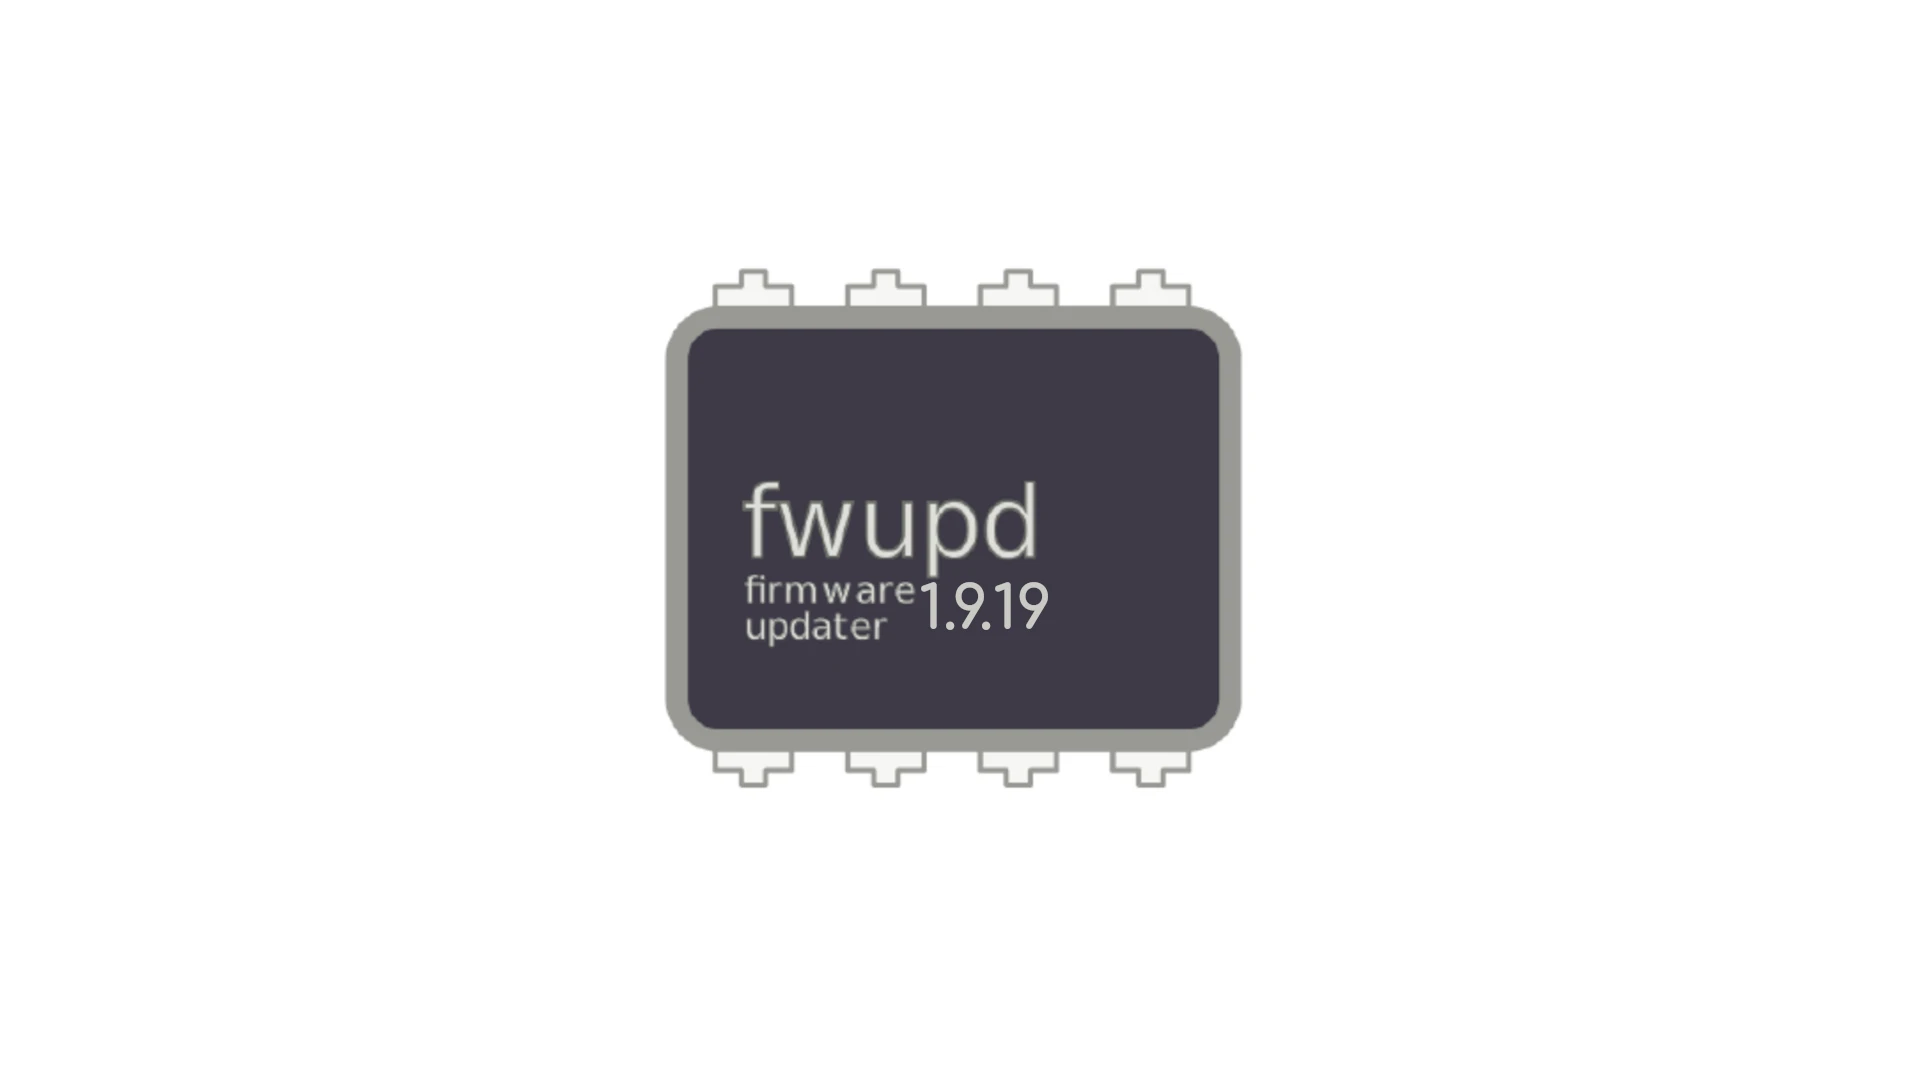 Fwupd 1.9.19 Linux Firmware Updater Supports Acer U32 and Luxshare 7-in-1 Docks